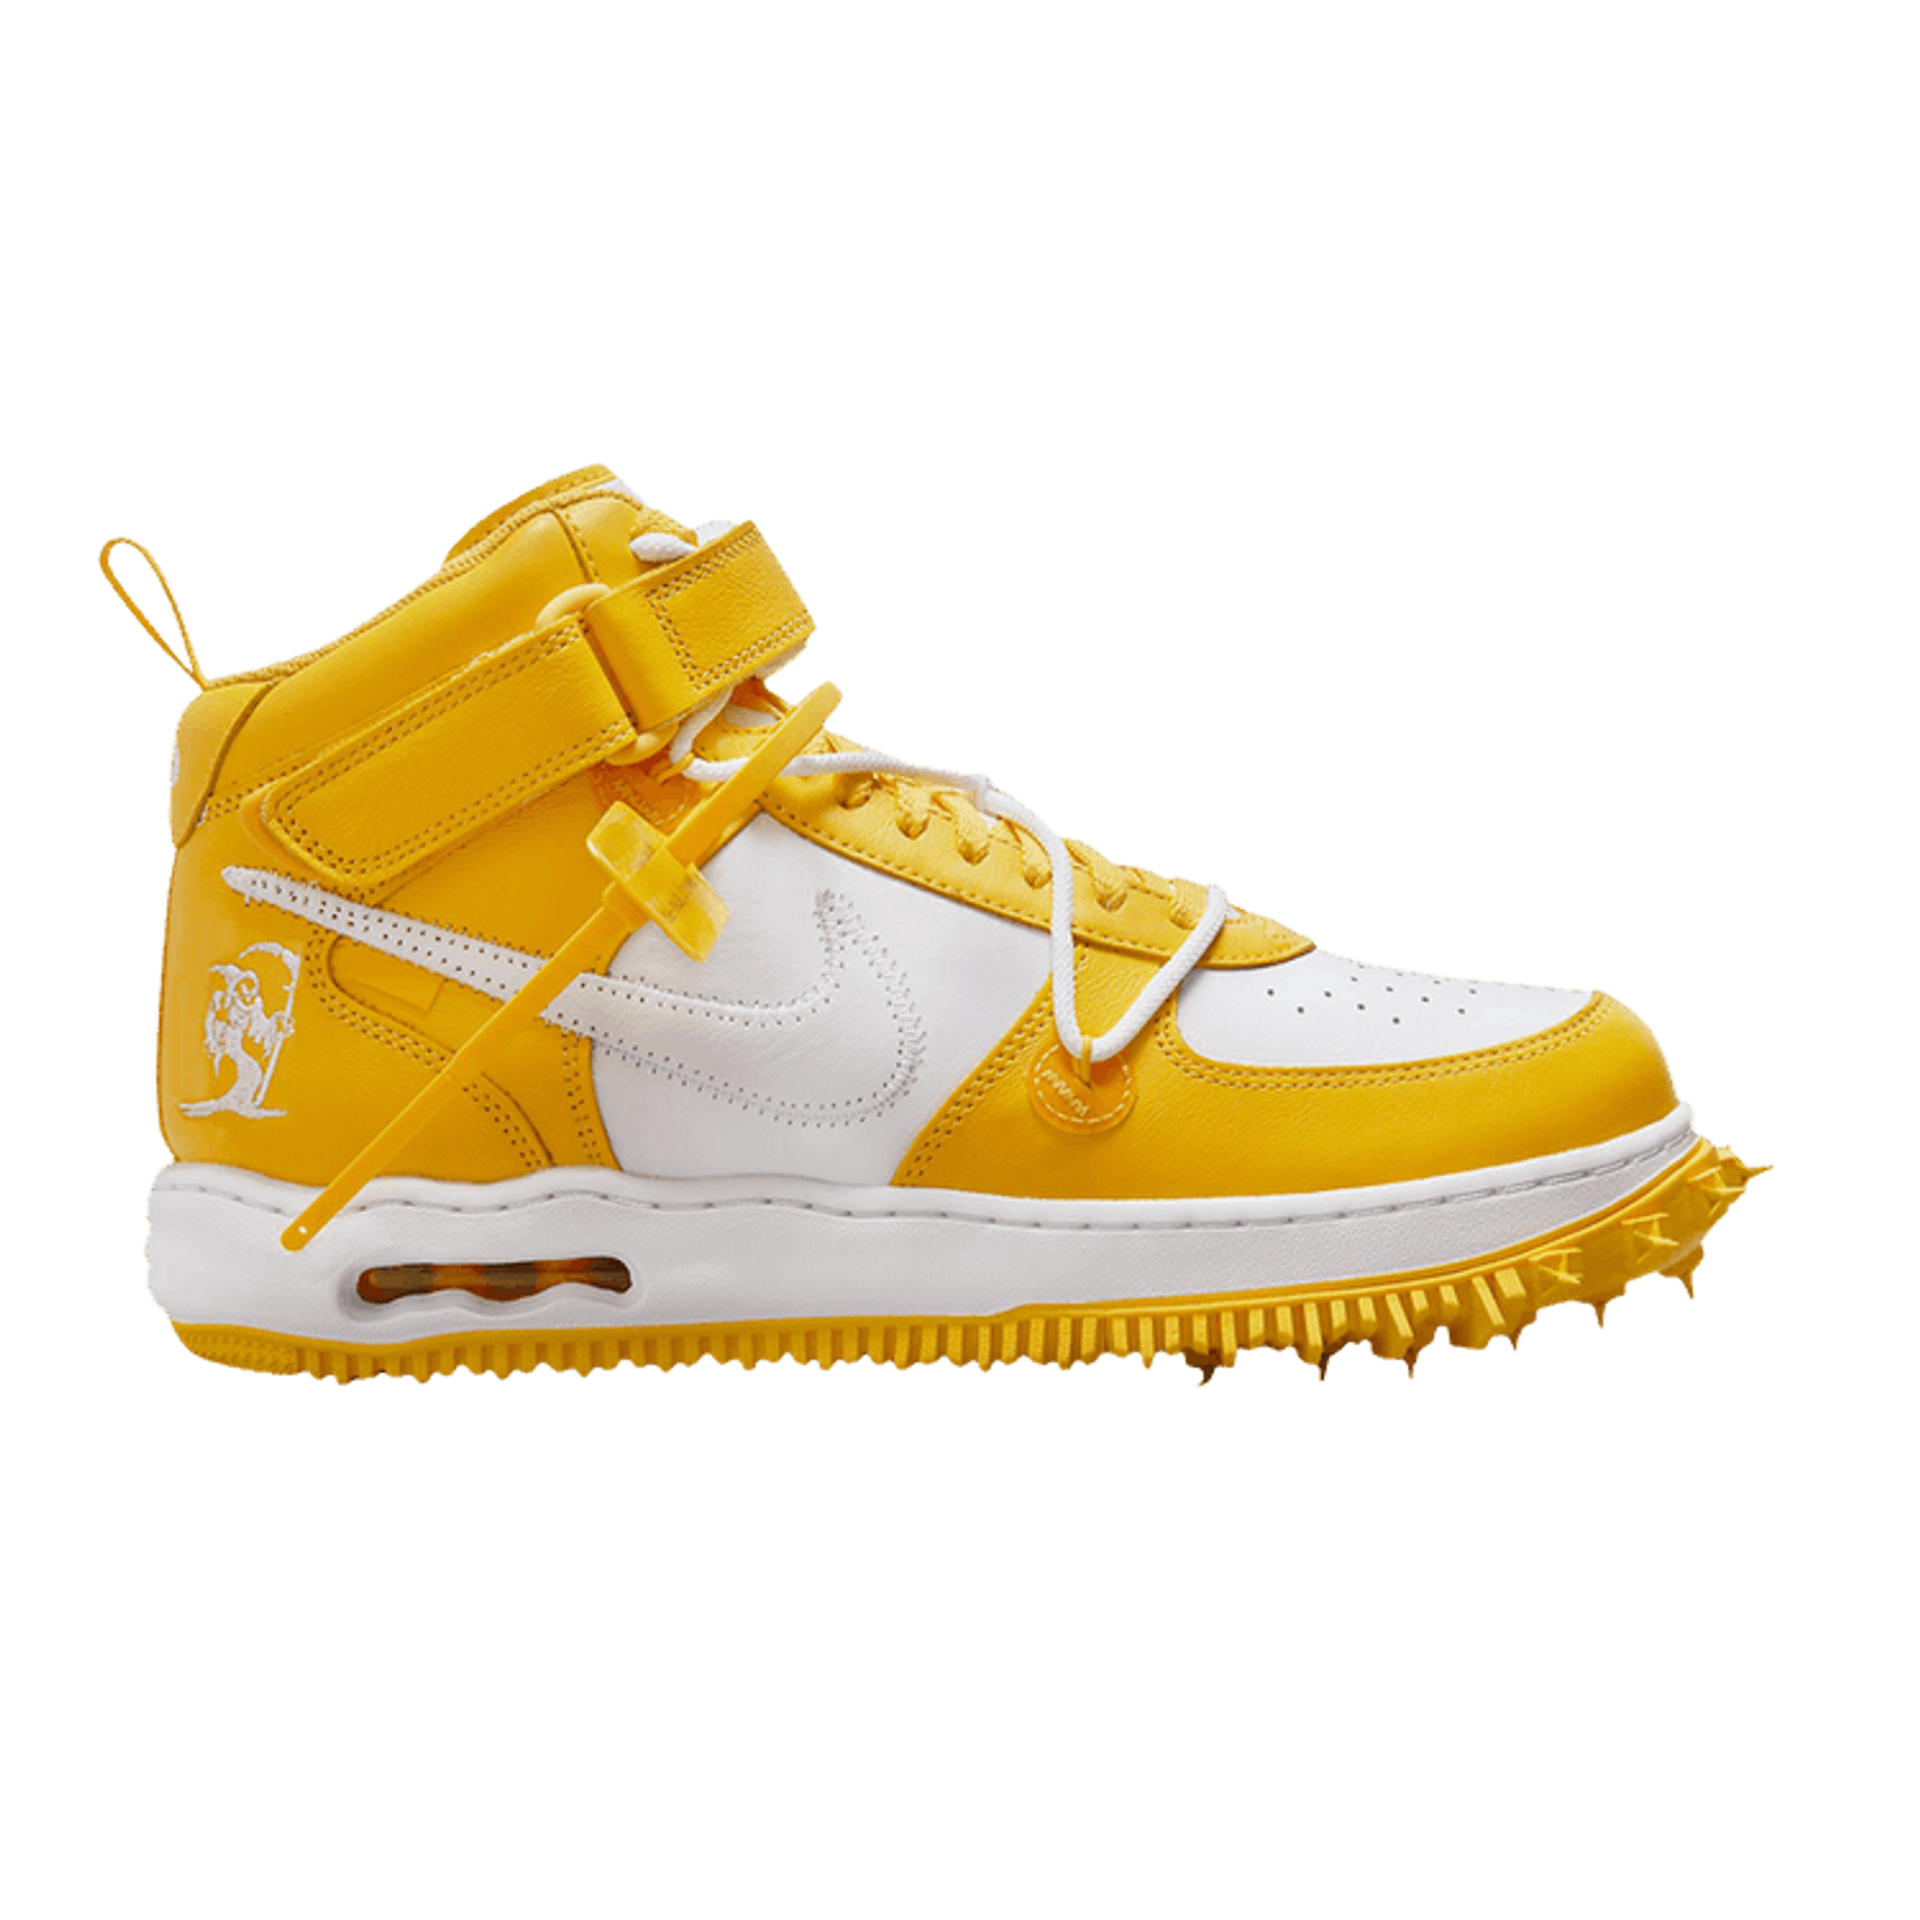 Off-White x Nike Air Force 1 Mid SP Leather 'Varsity Maize'